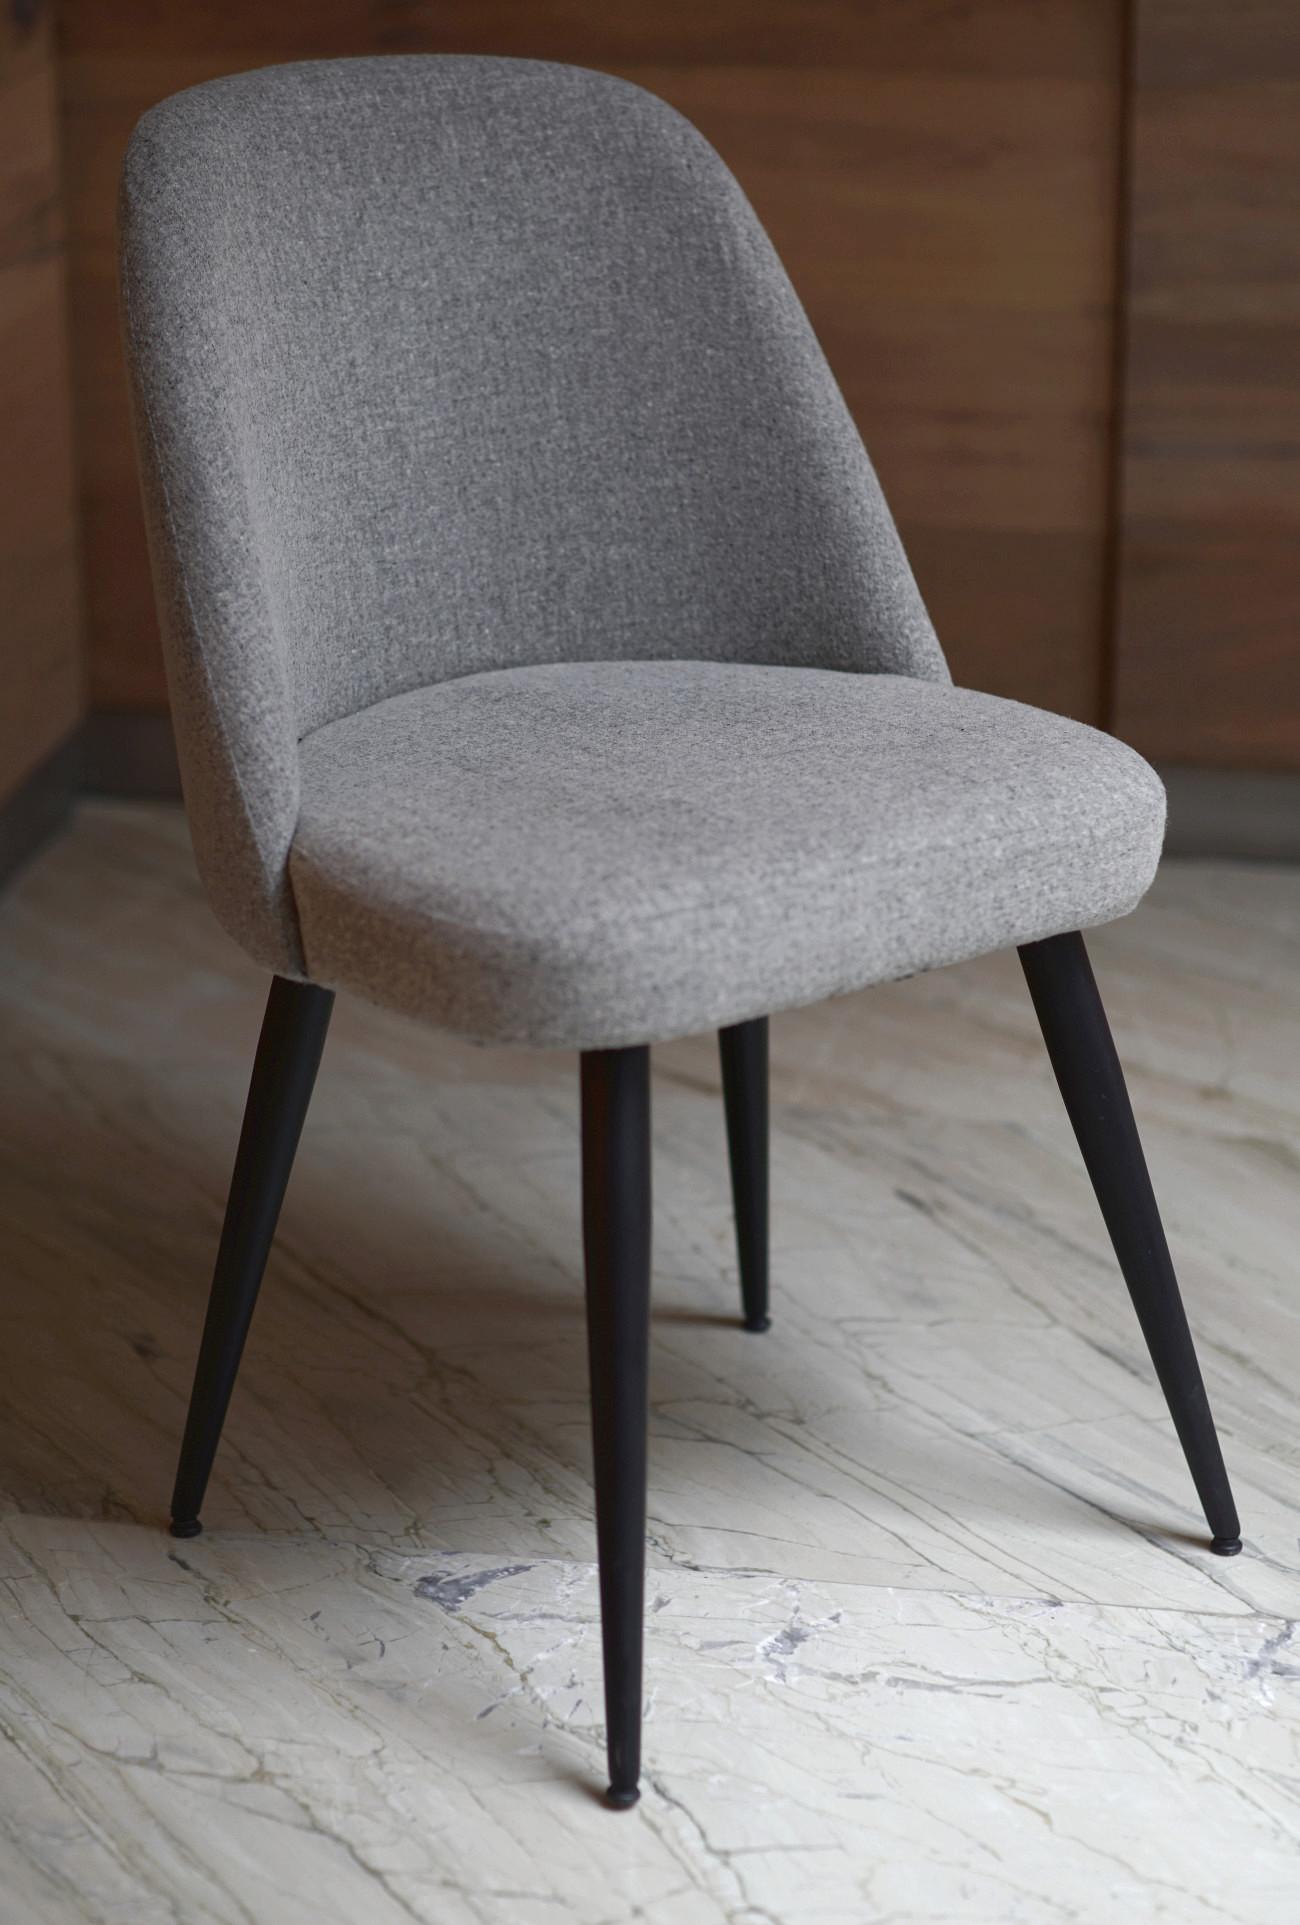 Helsinki collection. Helsinki chair: simple, elegant, comfortable. Available in steel base electrostatically painted, may be upholstered with variety of fabrics and colors.

Our clients´ favorite collection is based on a piece that is as handsome